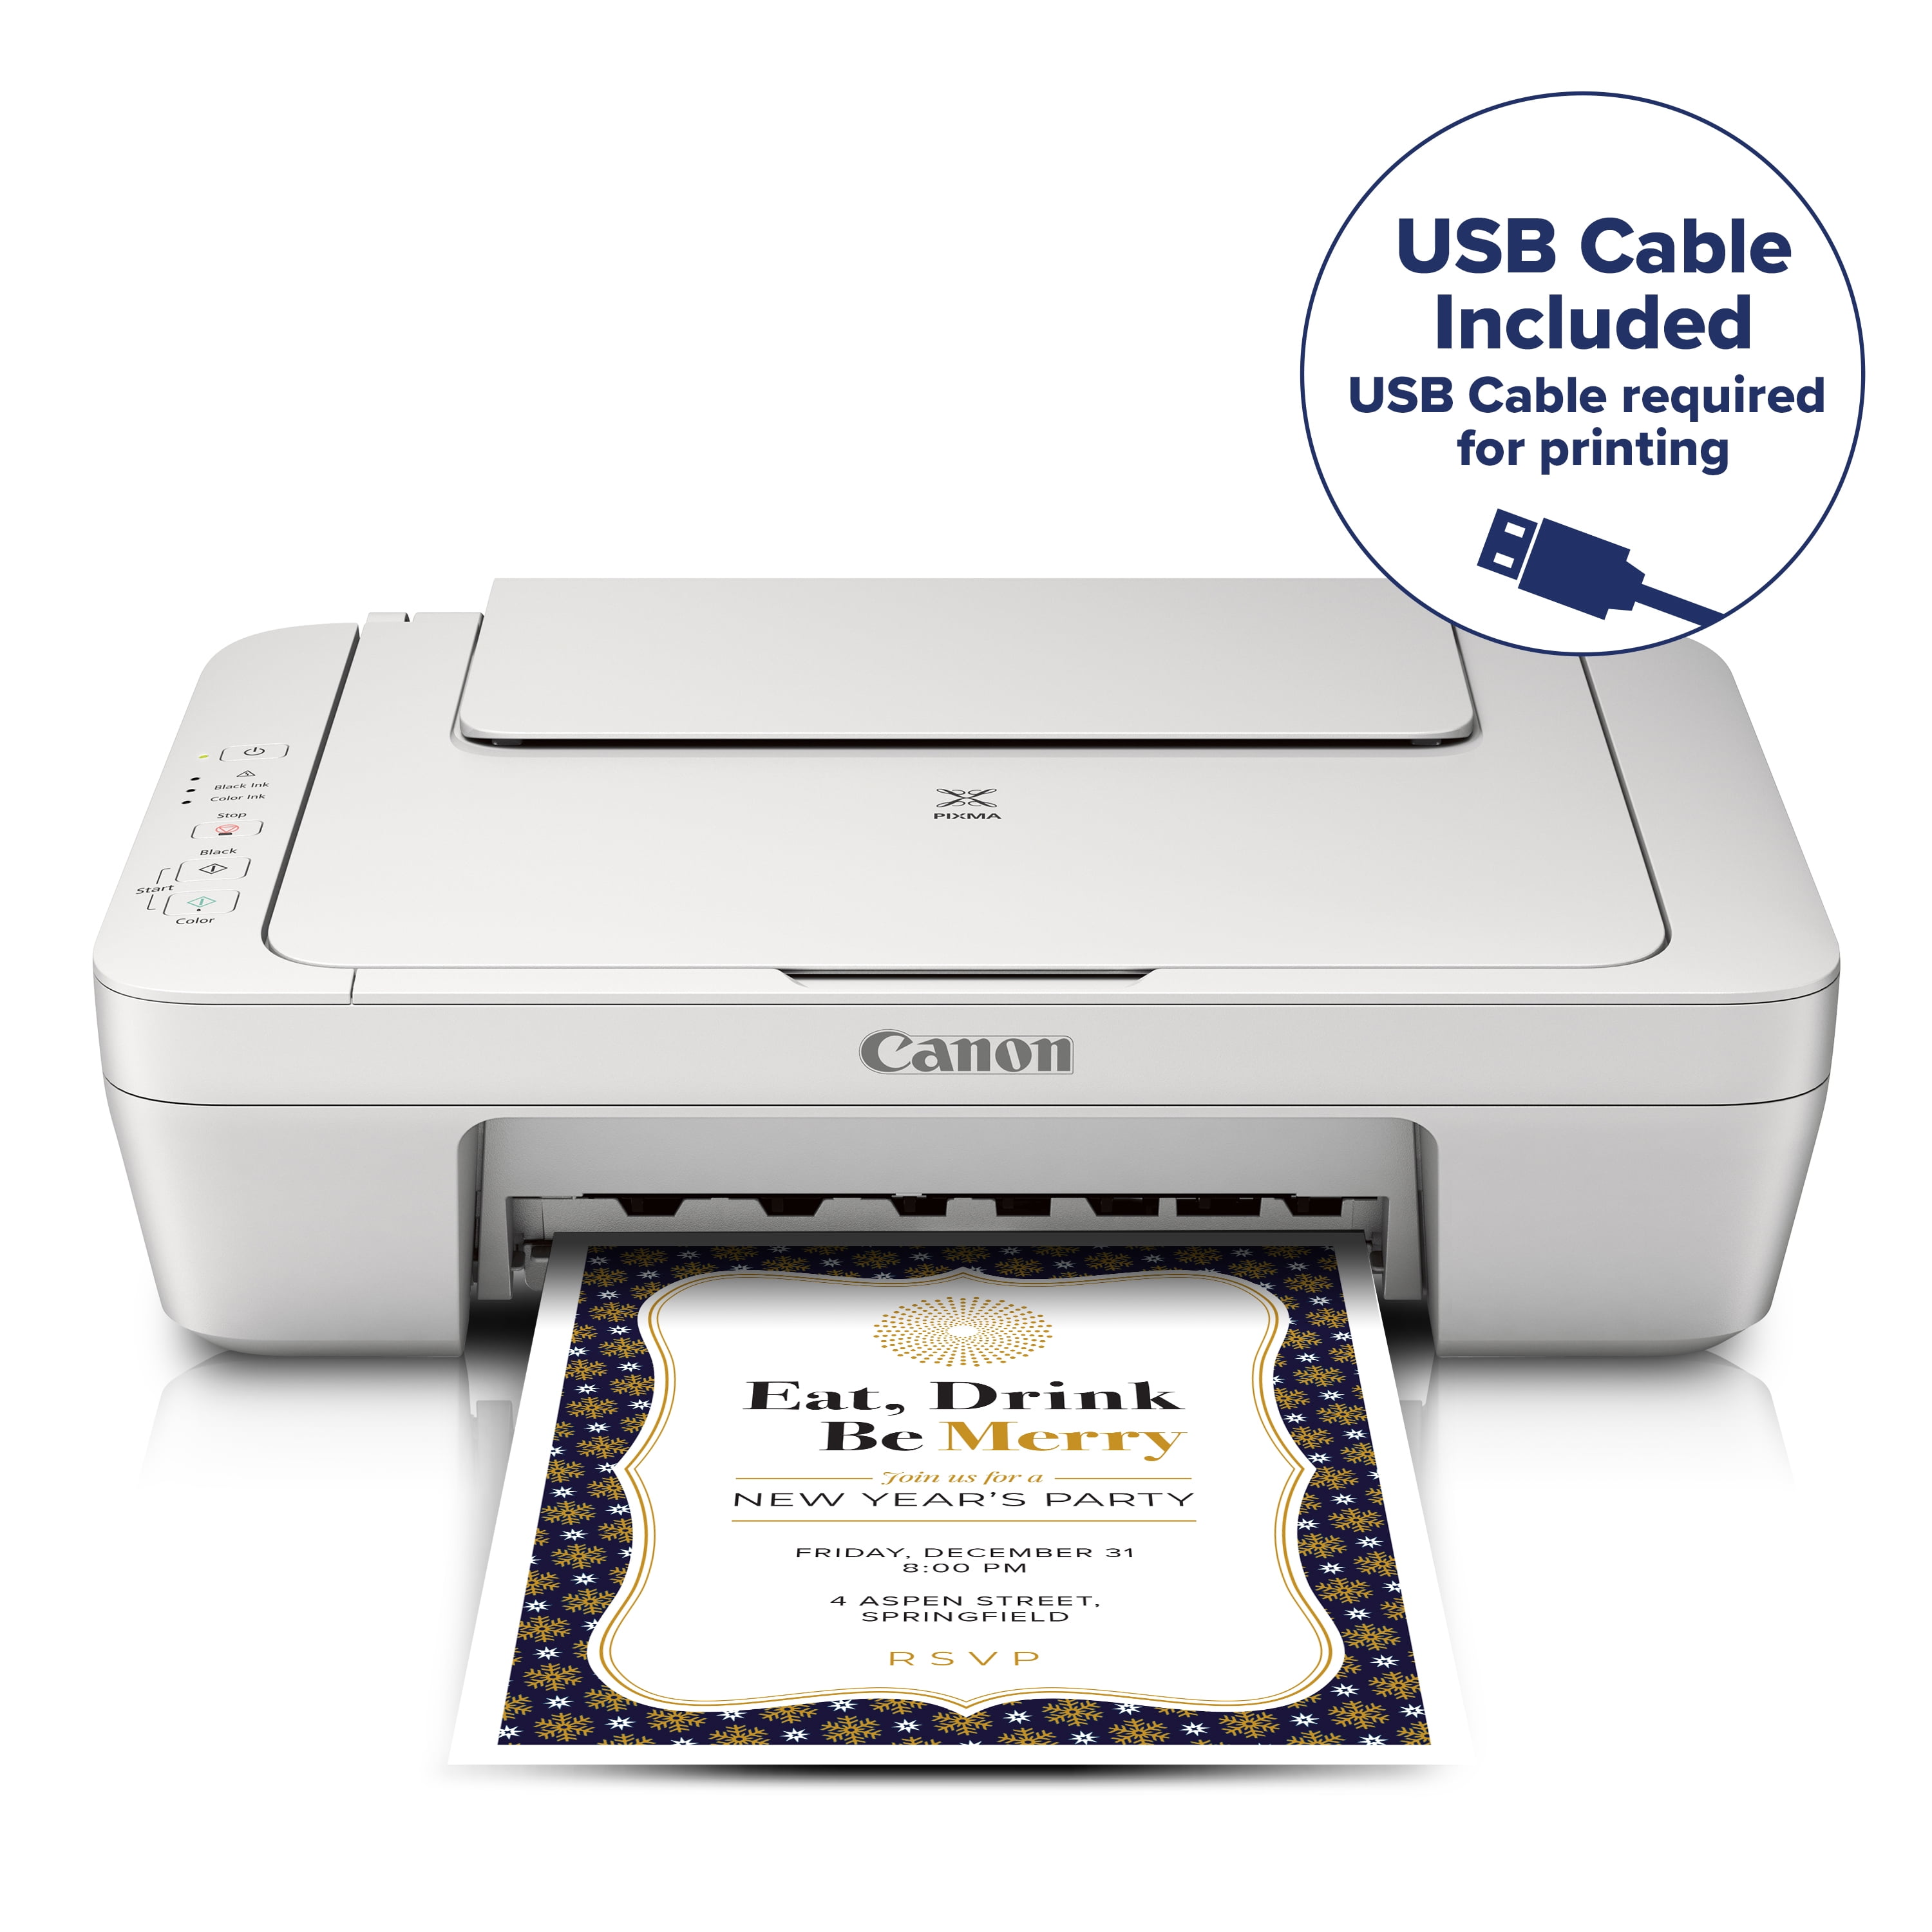 Officer Evakuering Hver uge Canon PIXMA MG2522 Wired All-in-One Color Inkjet Printer [USB Cable  Included], White - Walmart.com